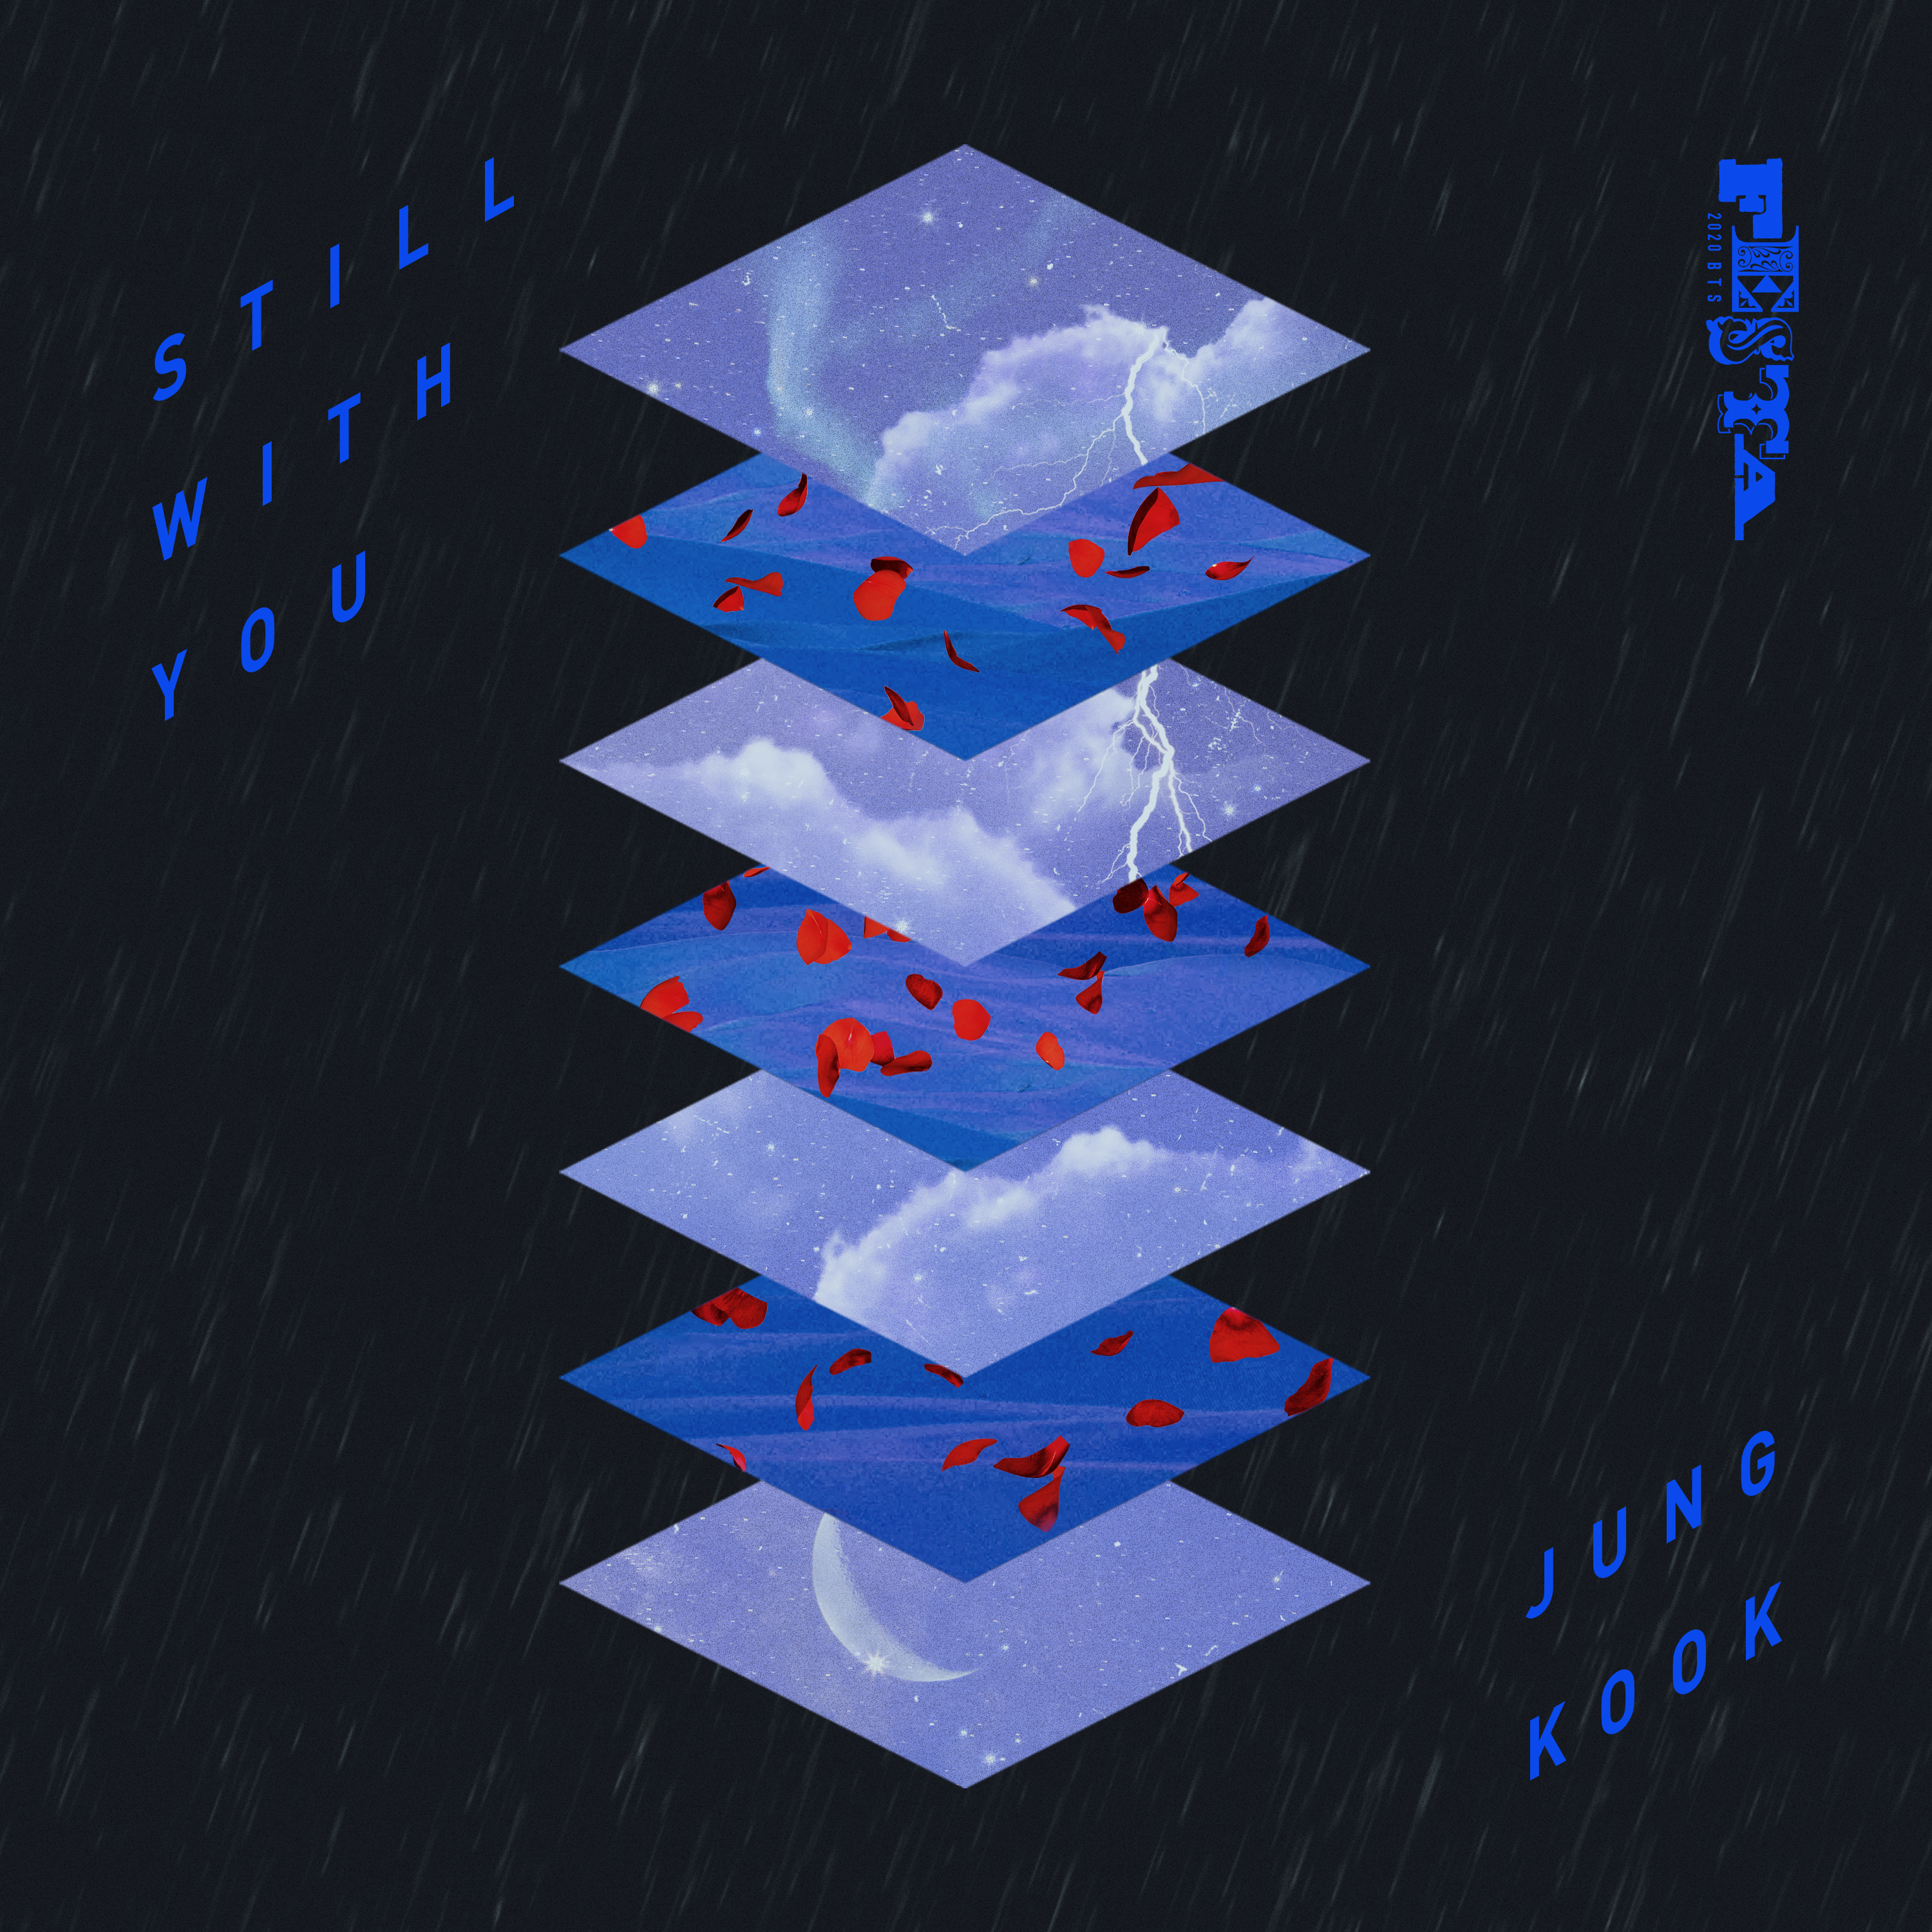 Muat turun Still With You by JK of BTS